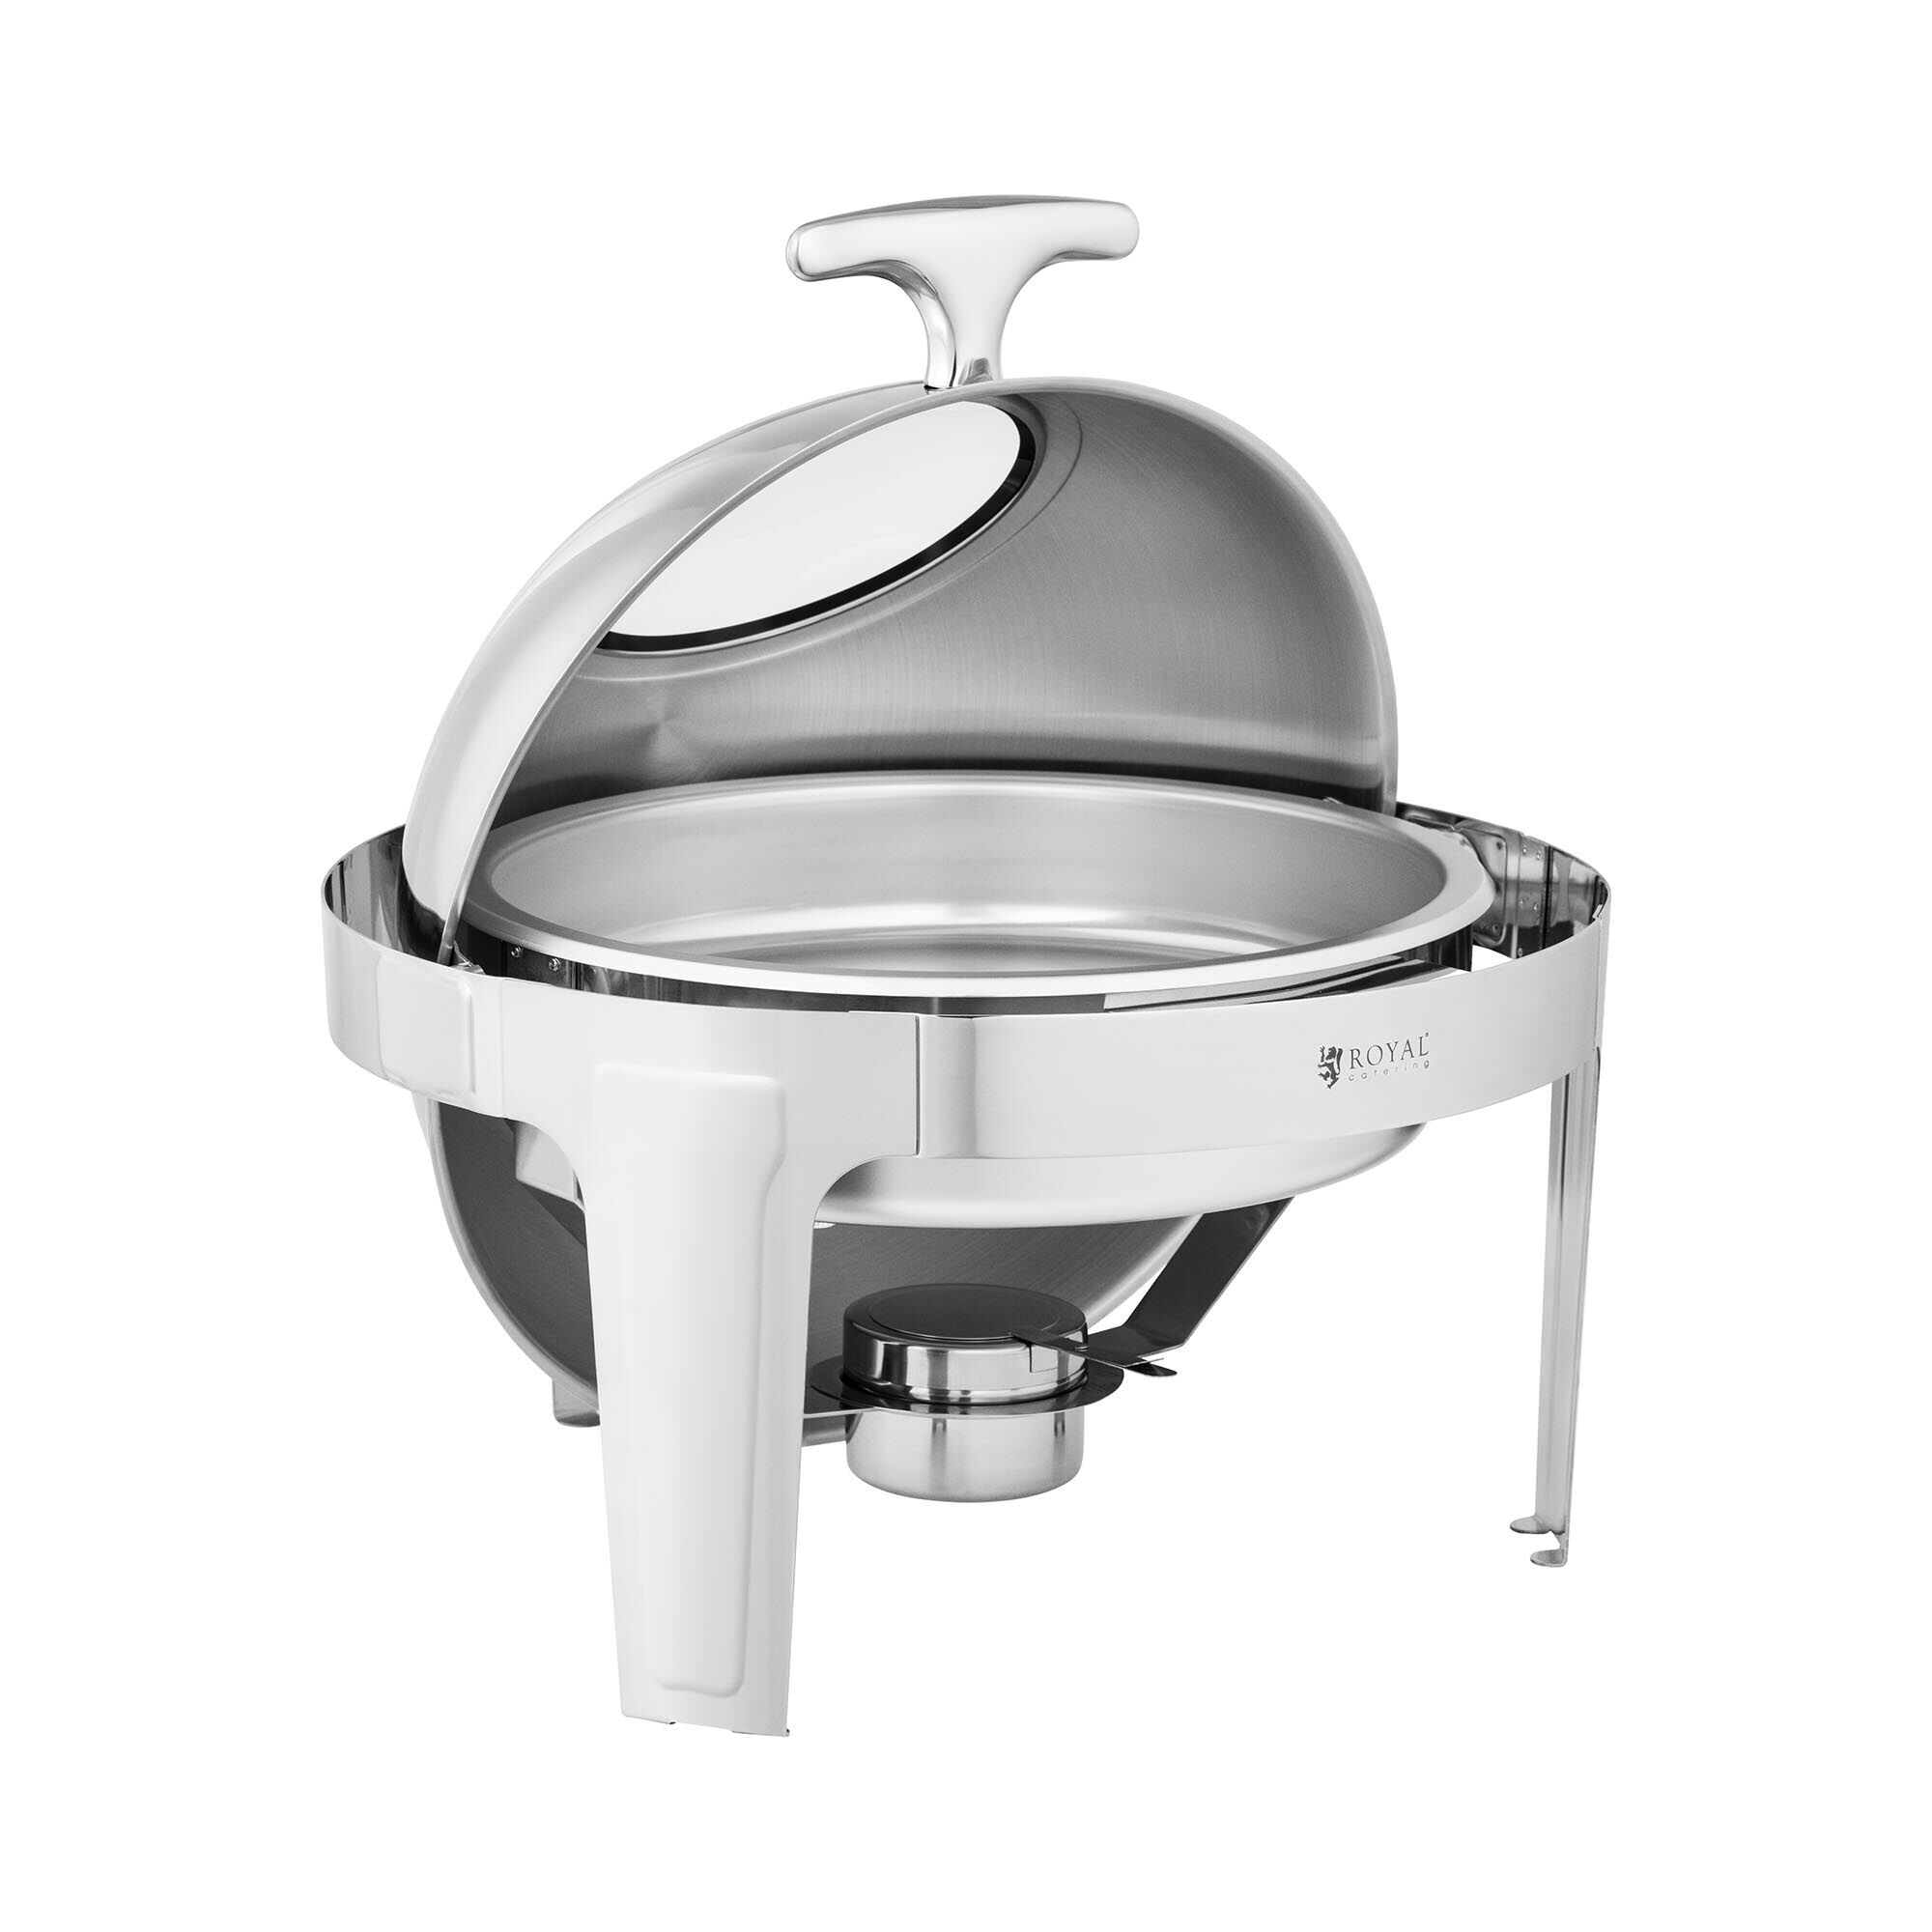 Royal Catering Chafing Dish - rund mit Sichtfenster - Royal Catering - 5,8 L